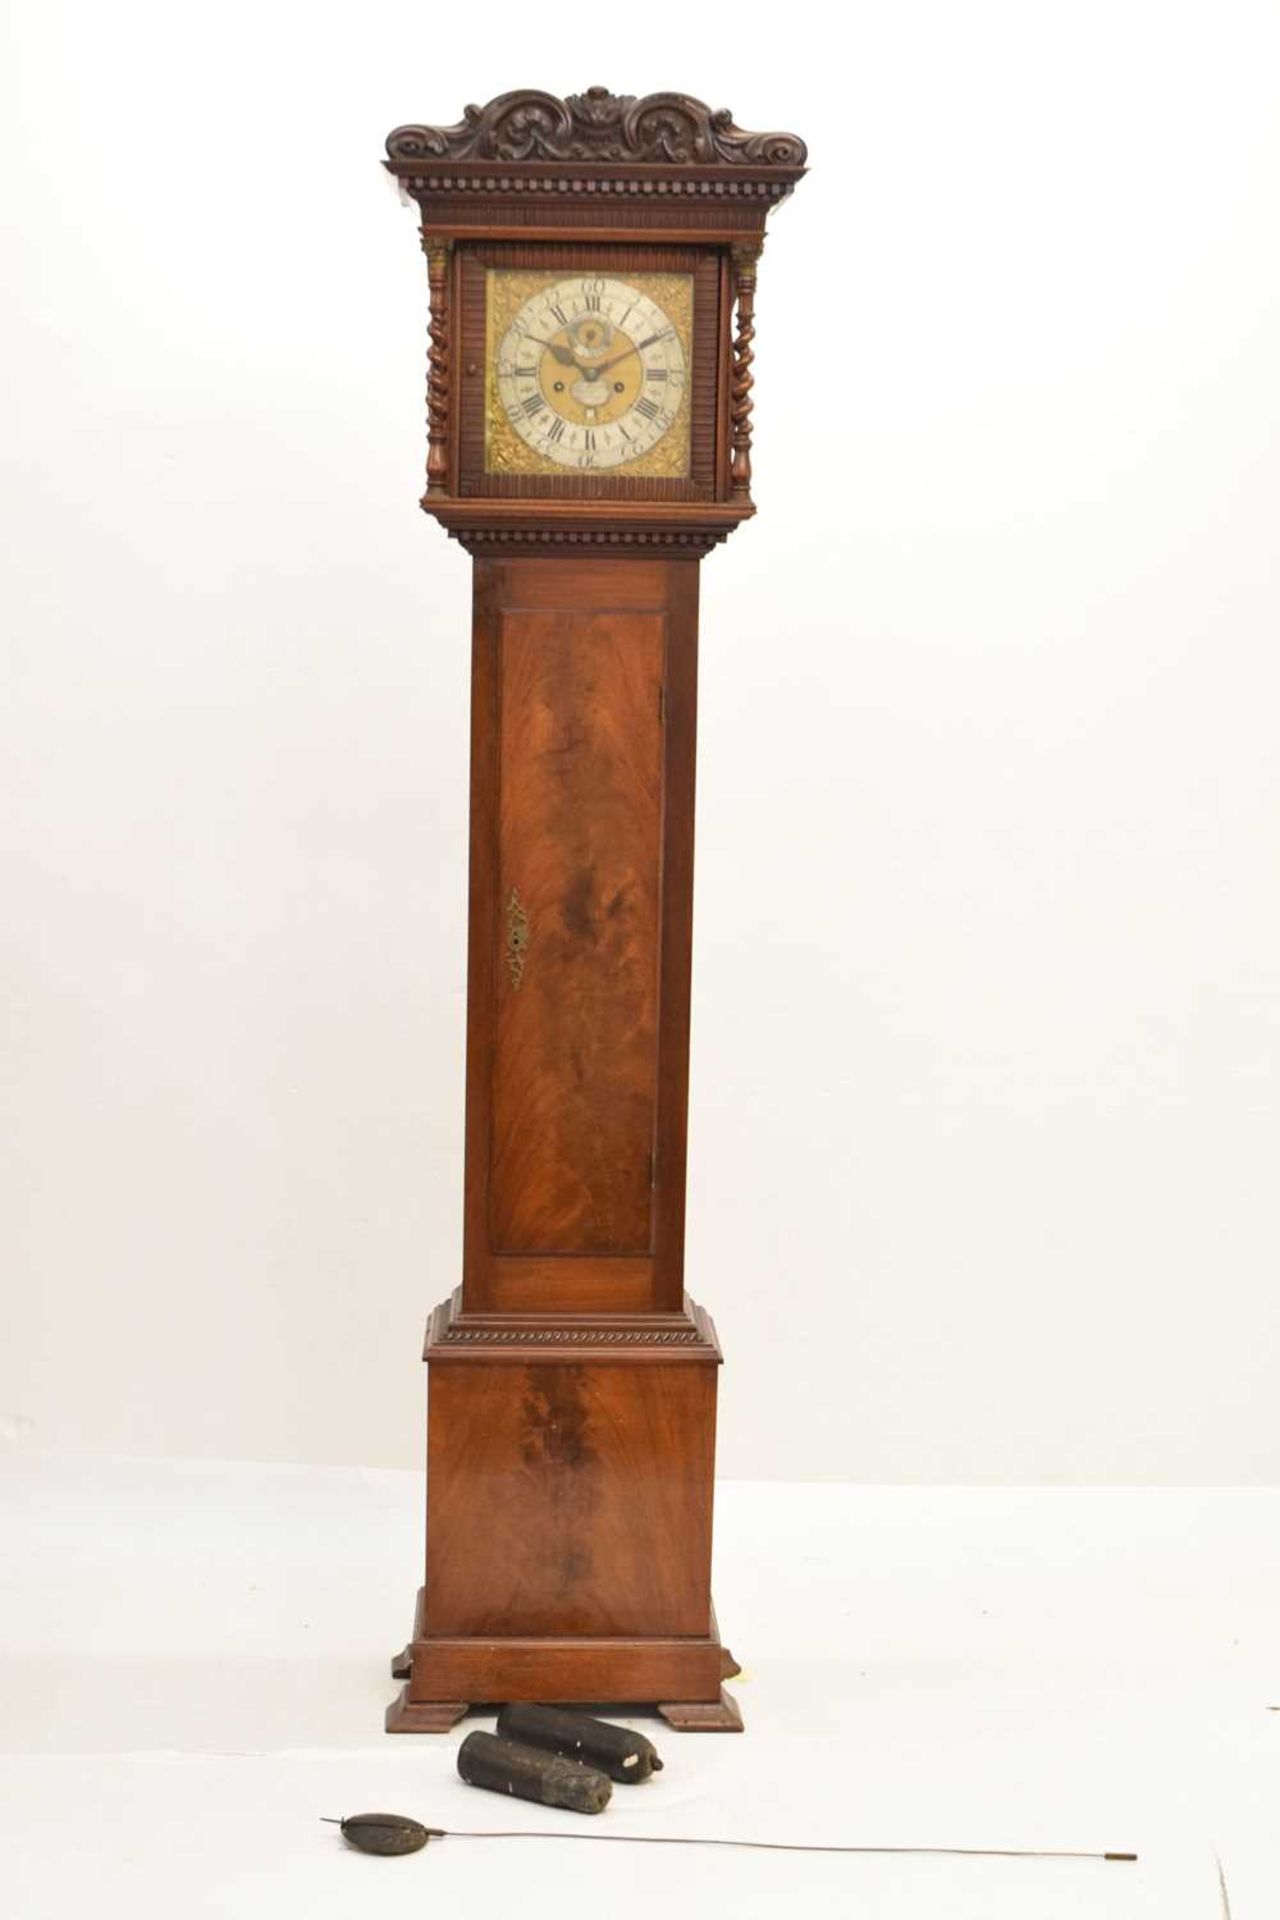 Welsh Interest - George III 8-day brass dial longcase clock - Image 2 of 20